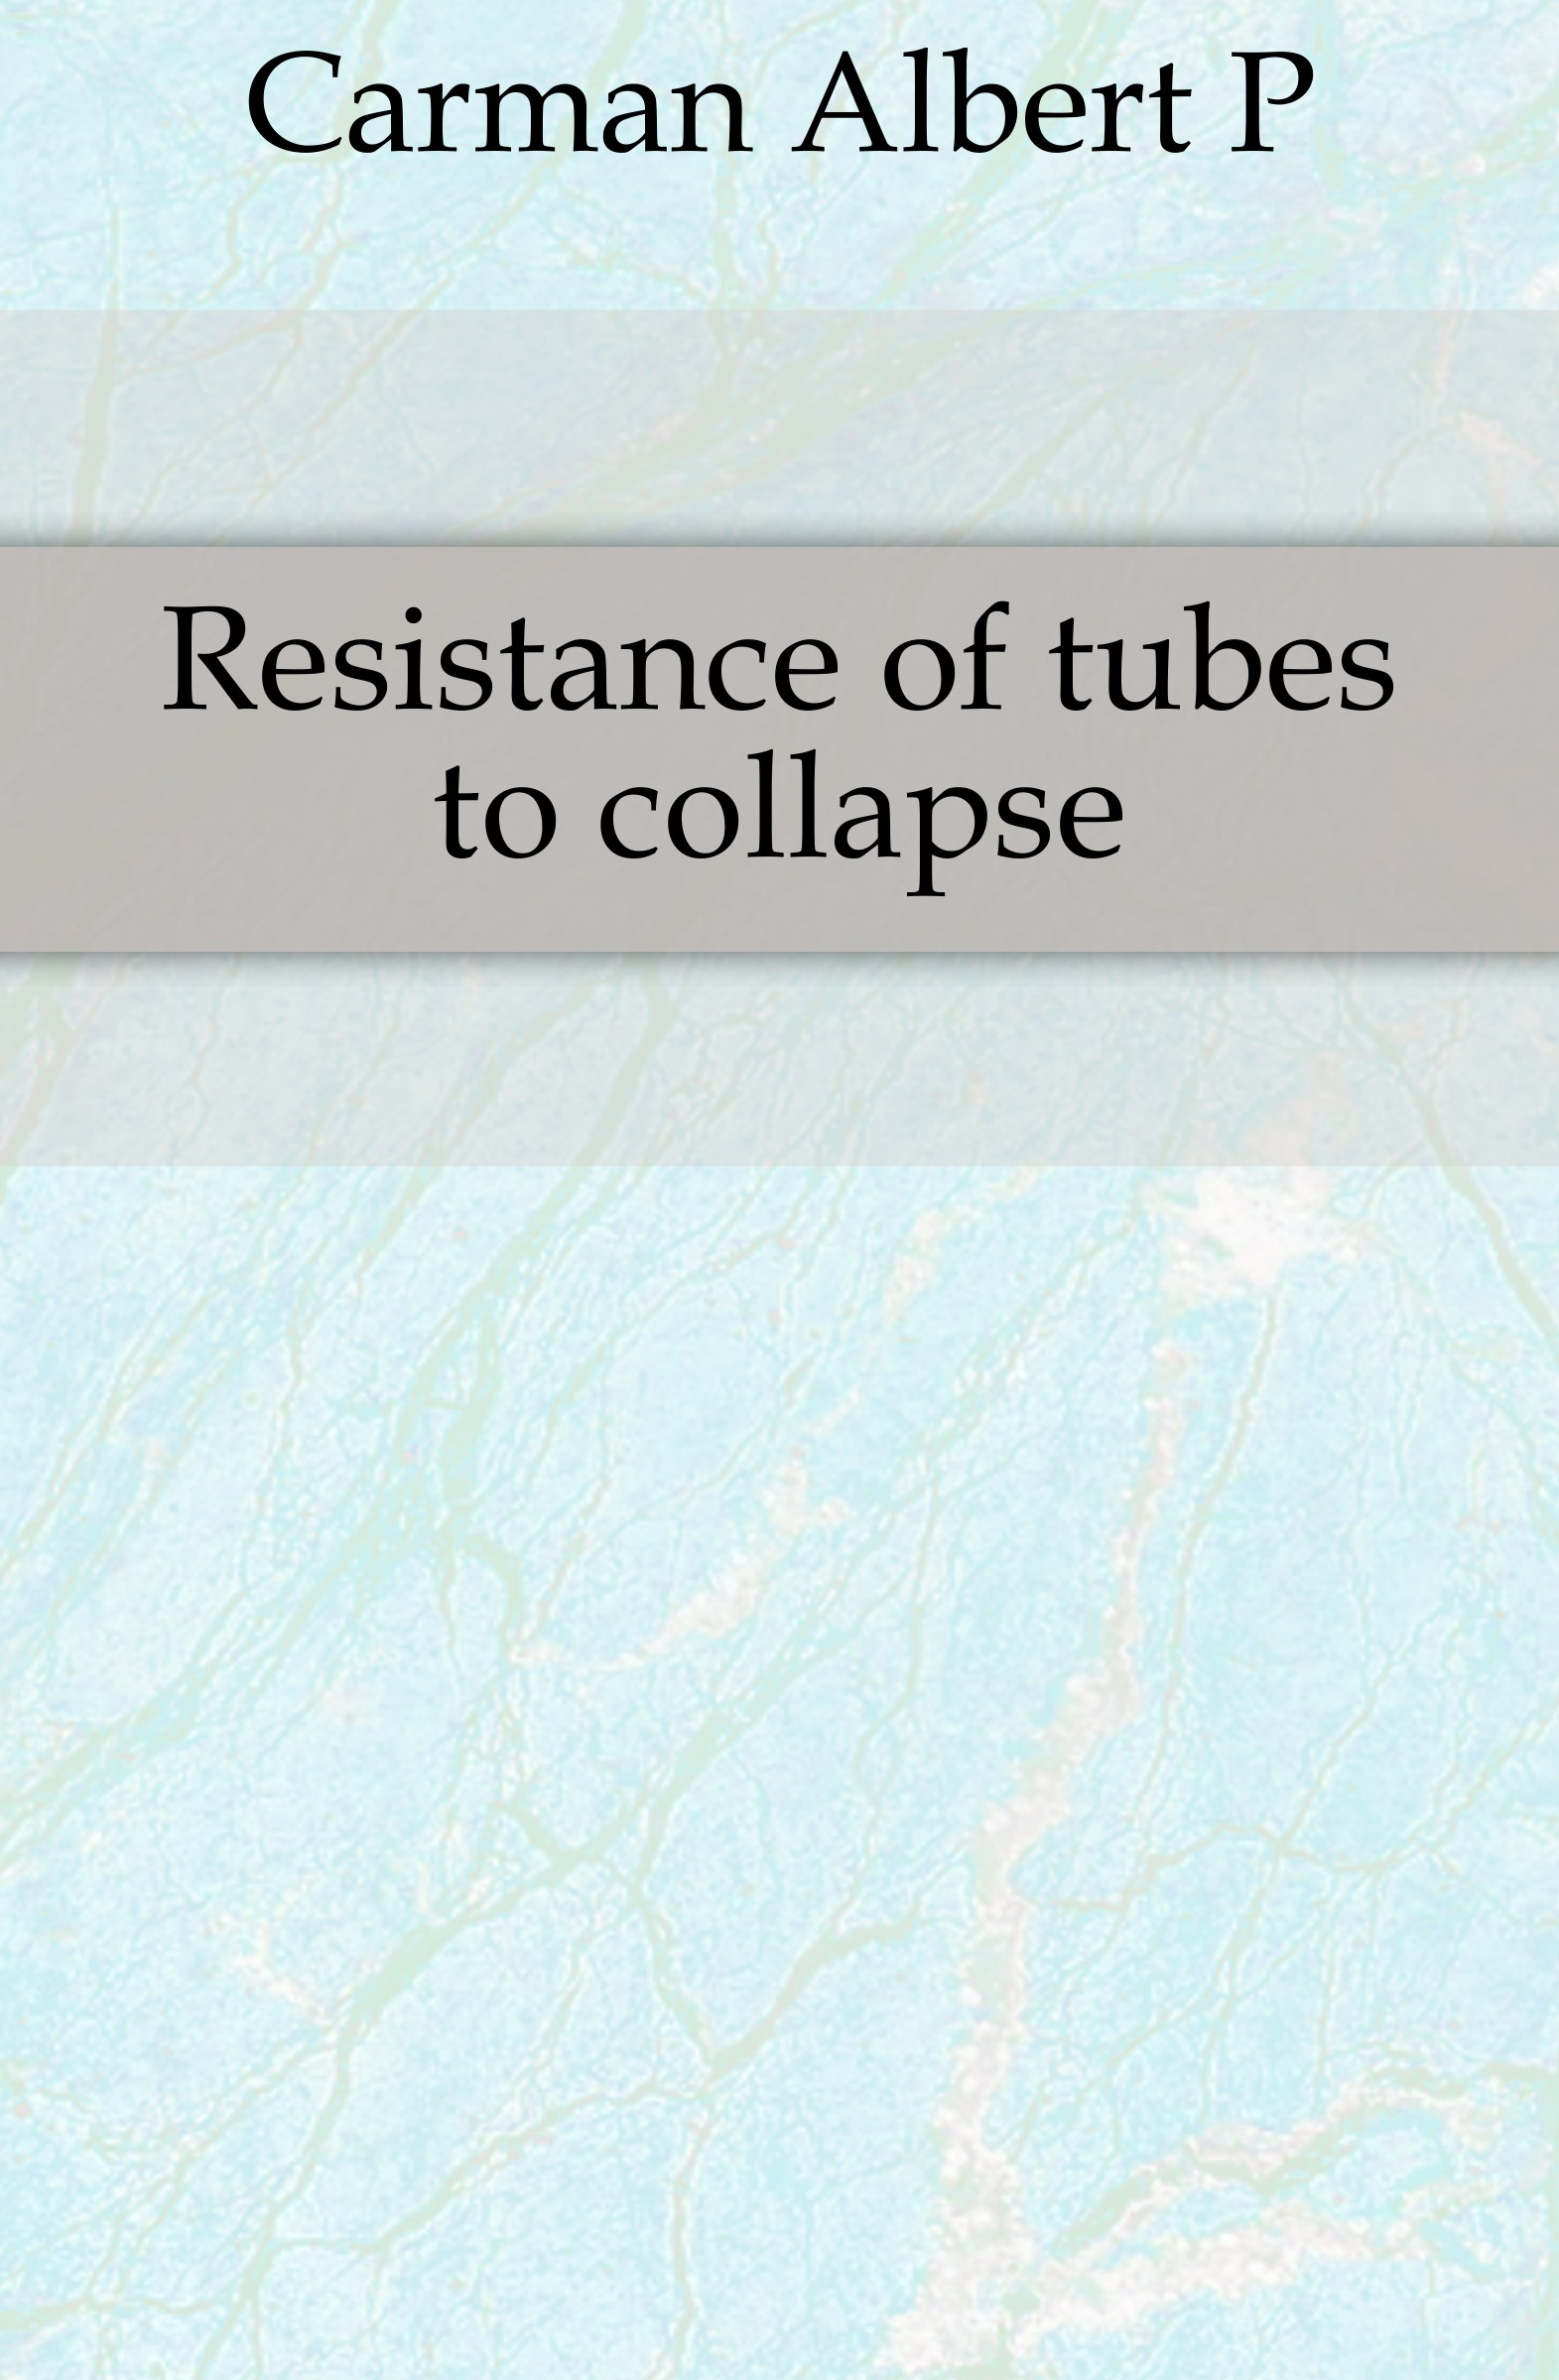 Albert P. Carman Resistance of tubes to collapse